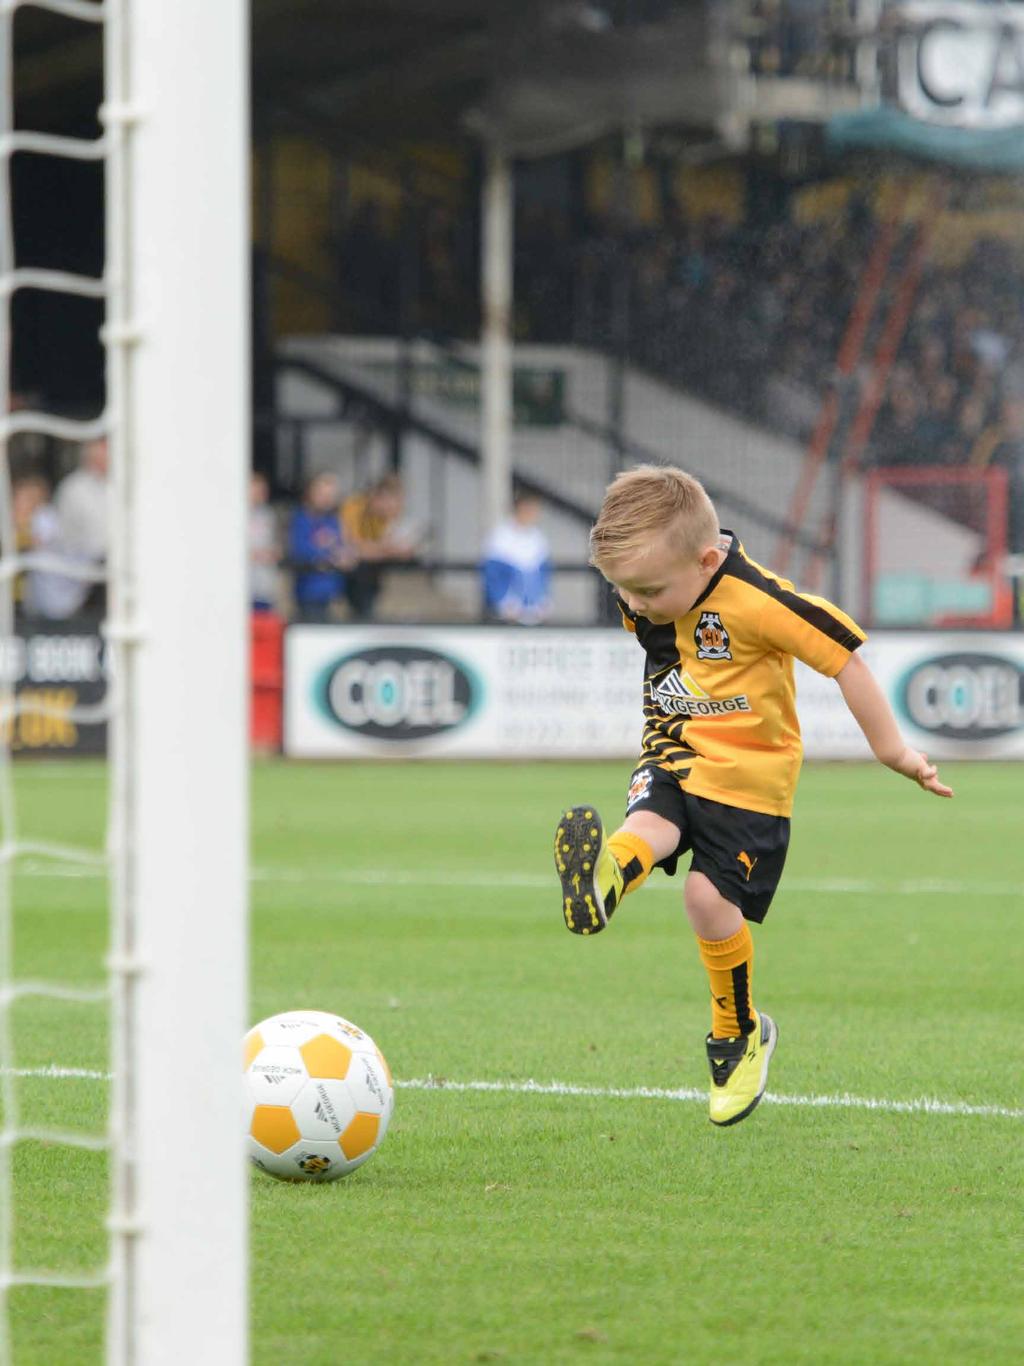 Soccer Tots An introduction to football The Cambridge United Soccer Tots programme caters for children aged 2 5 years old who are taking their first steps into football.